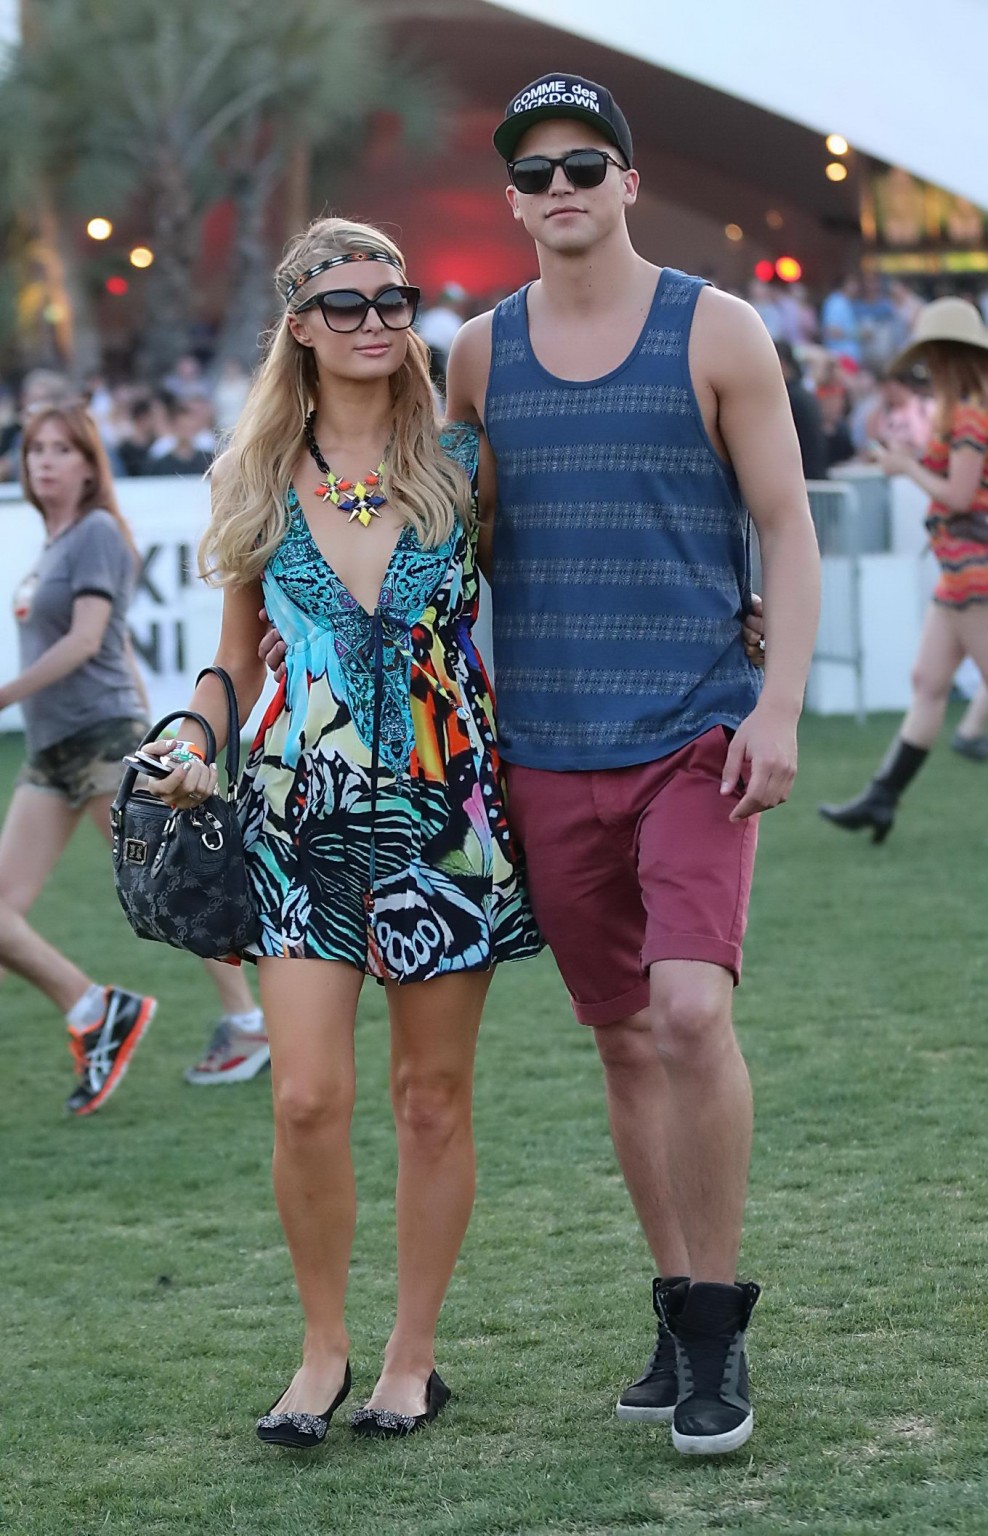 Paris Hilton braless showing huge cleavage in a colorful mini dress at 2013 Coac #75235505